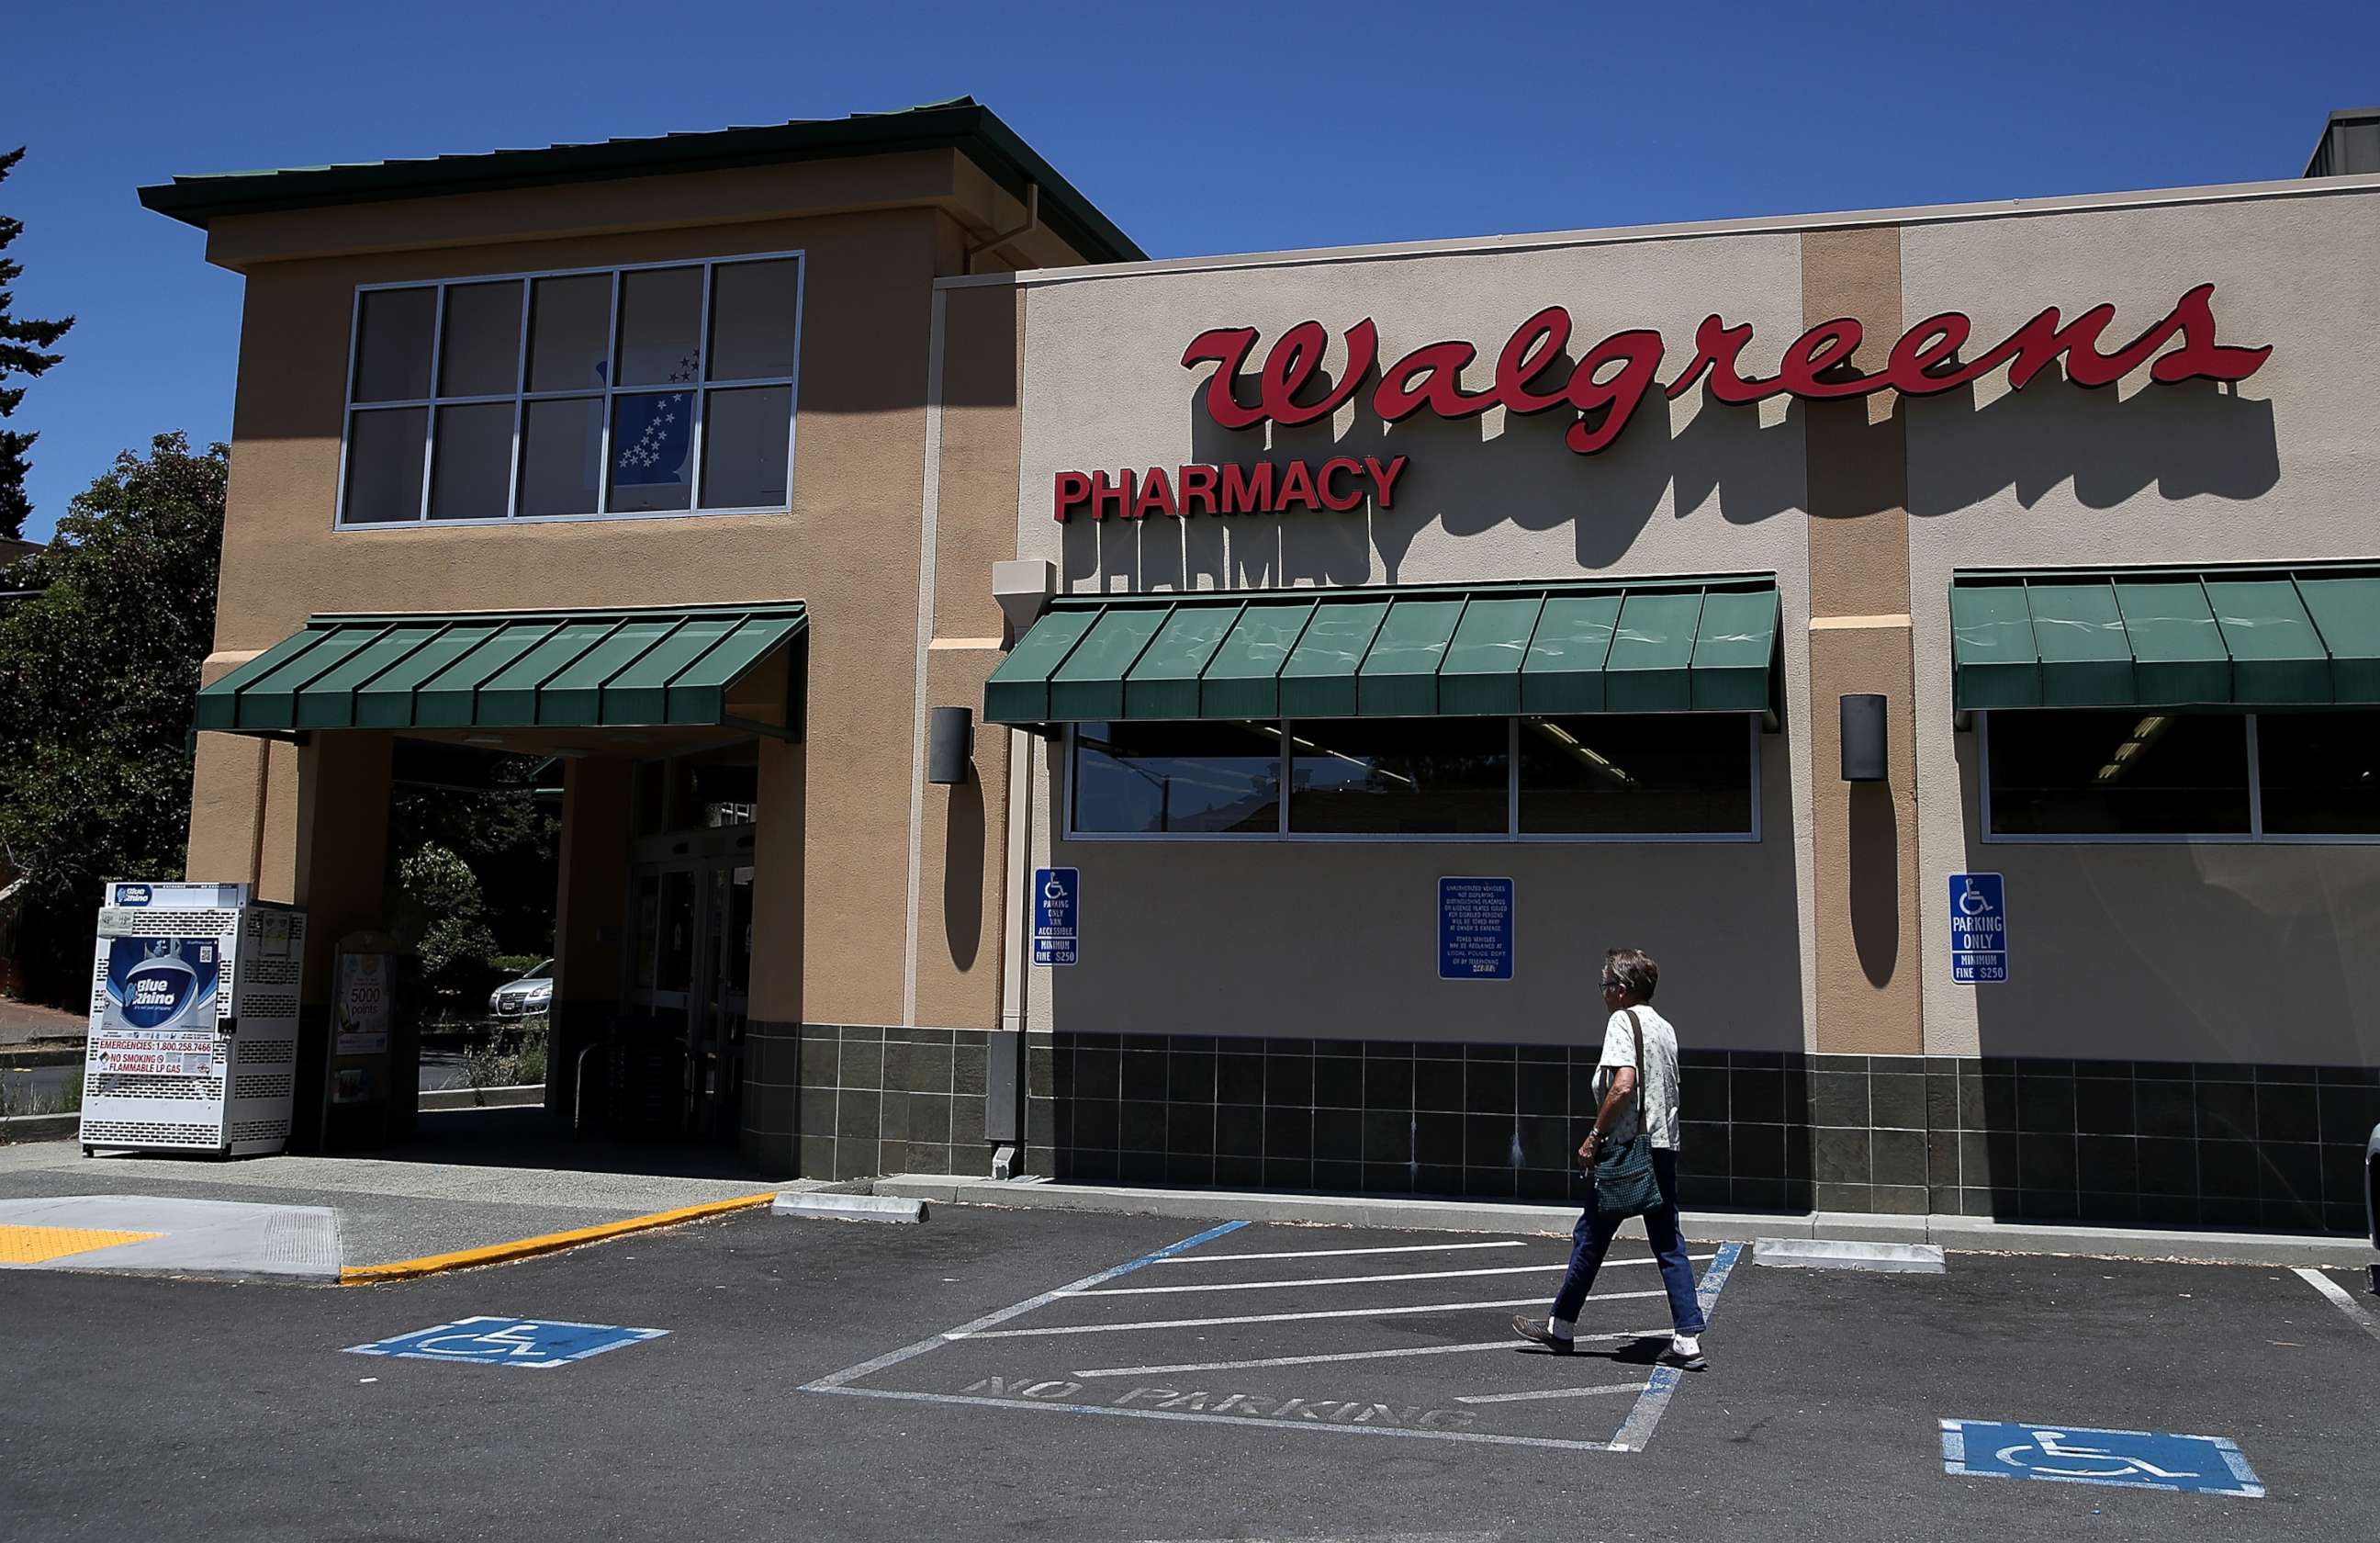 PHOTO: A customer enters a Walgreens store, on June 29, 2017, in San Anselmo, Calif. 